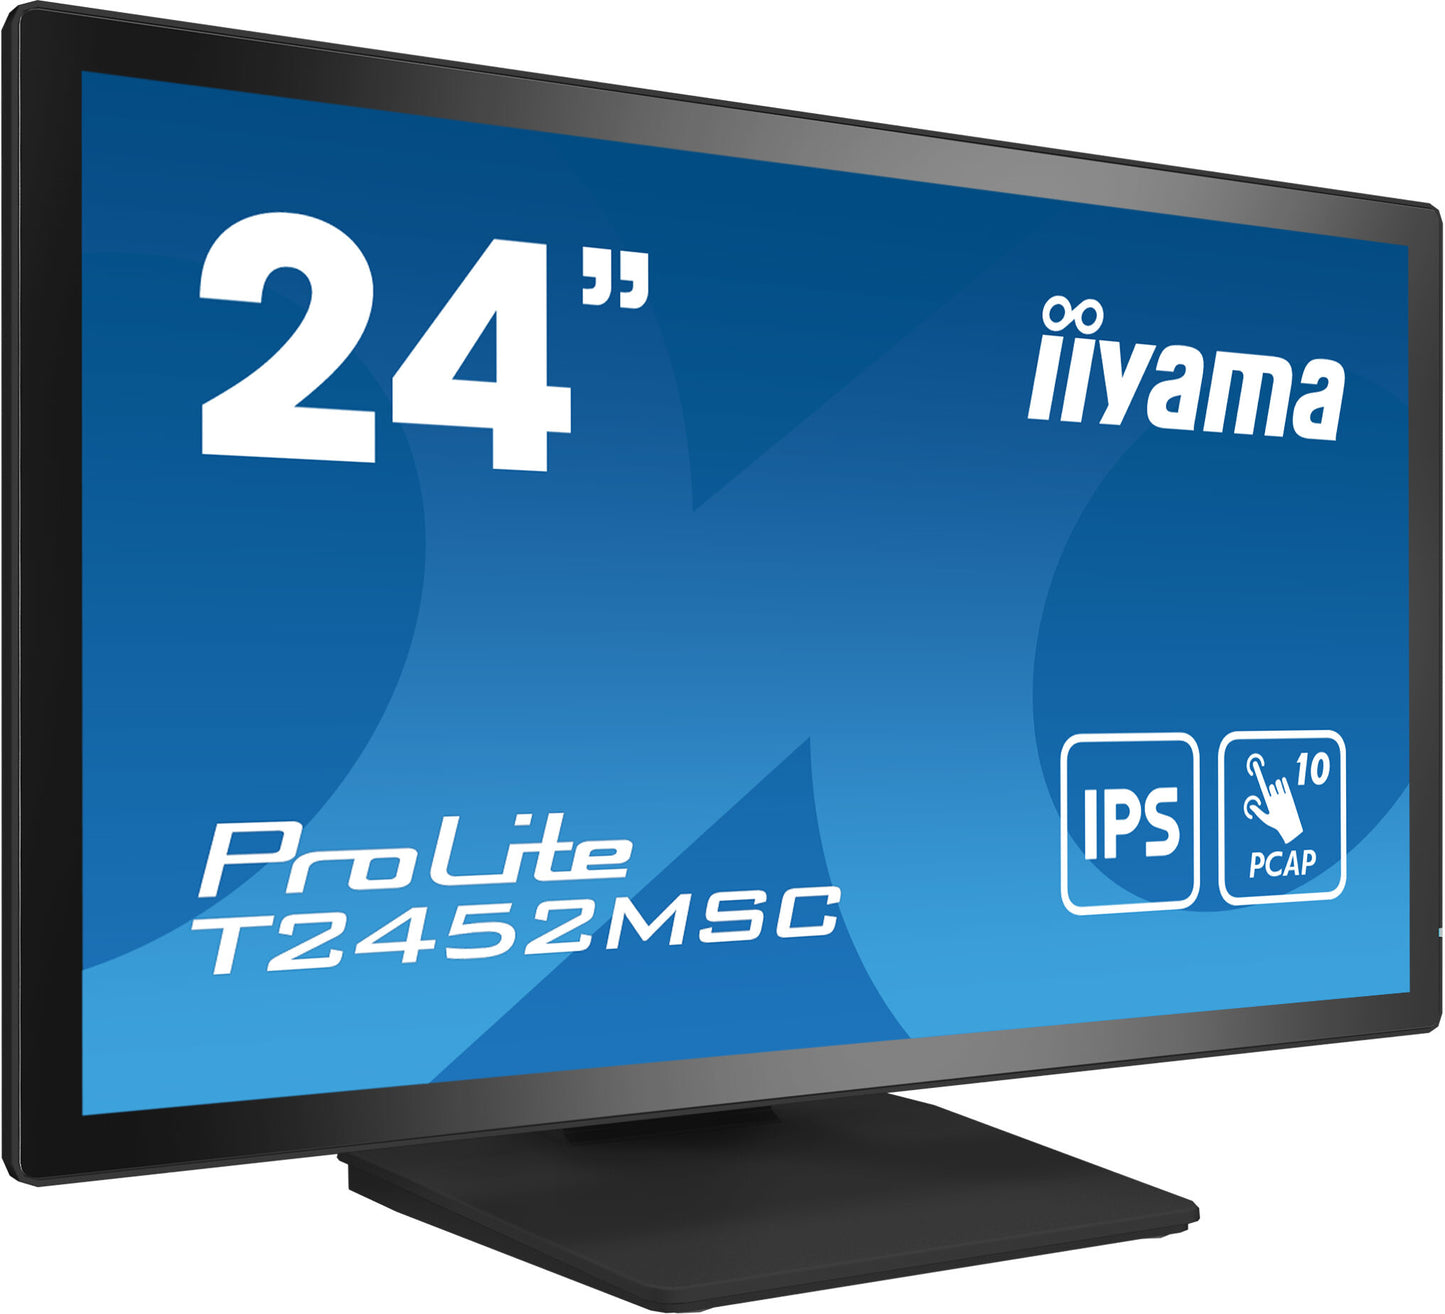 24" IPS Bonded PCAP, 10P Touch with Anti-Finger print coating, 1920x1080, Flat Bezel Free Glass Fron